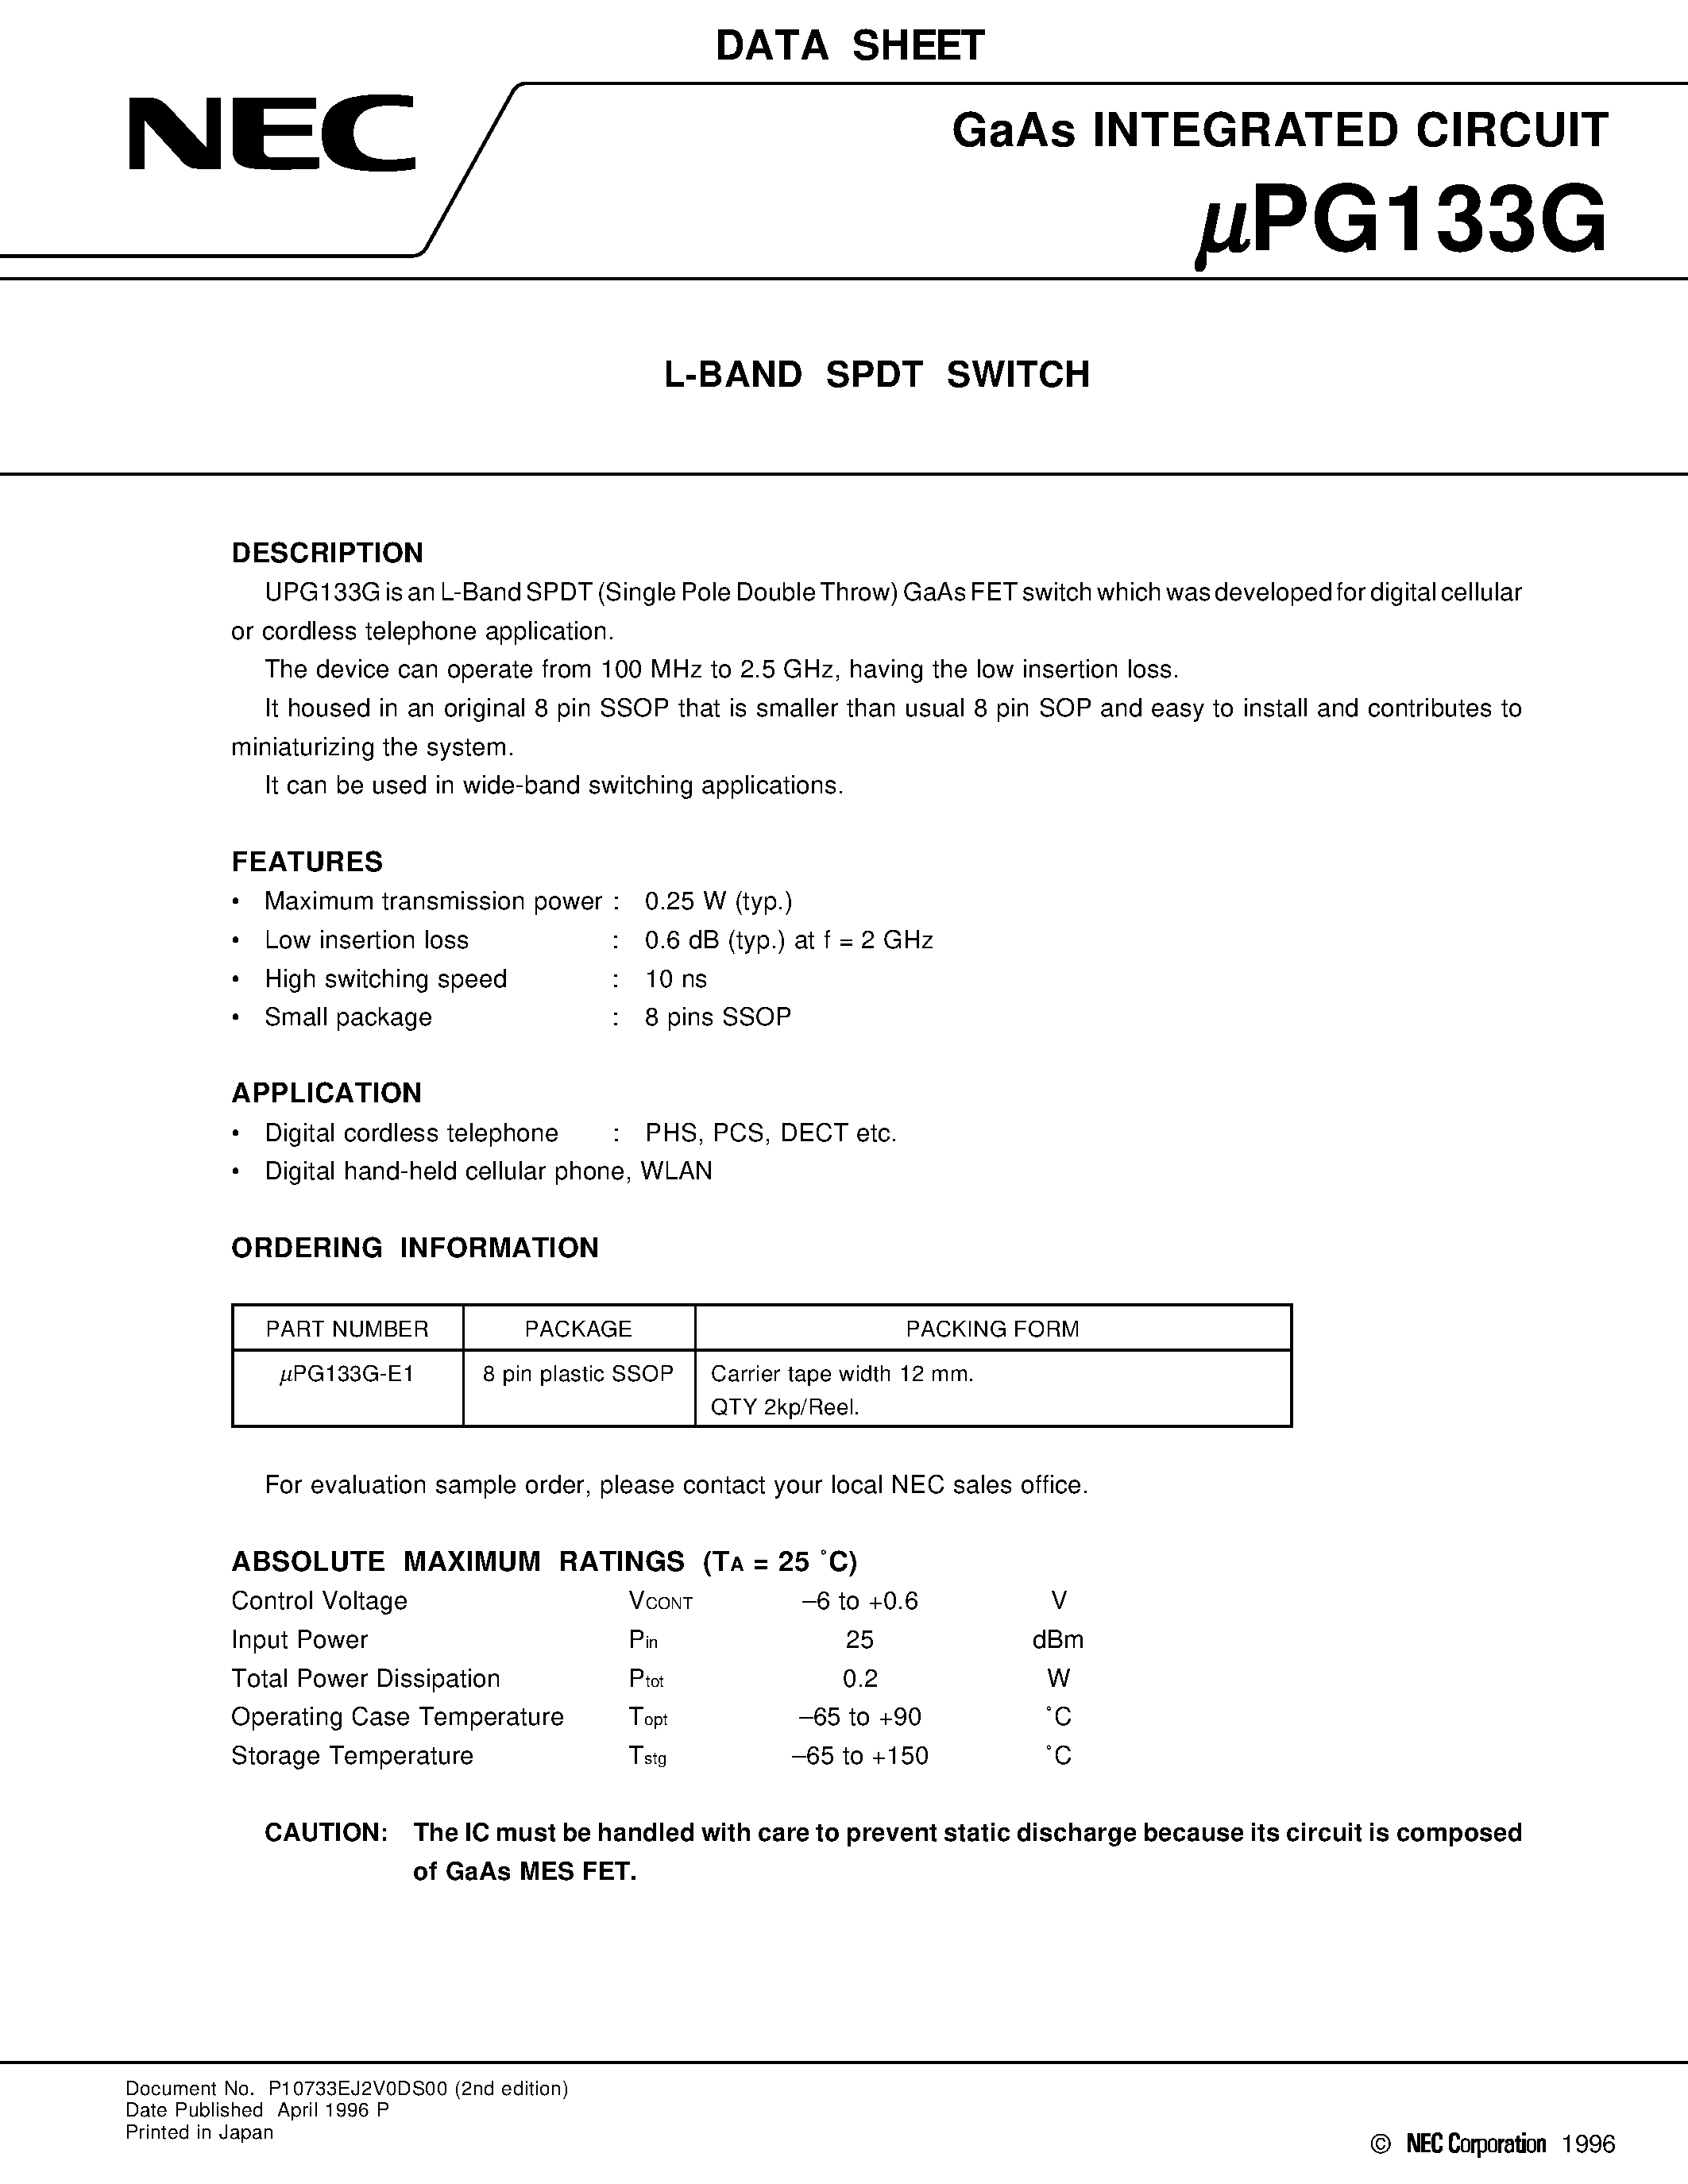 Datasheet UPG133G-E1 - L-BAND SPDT SWITCH page 1